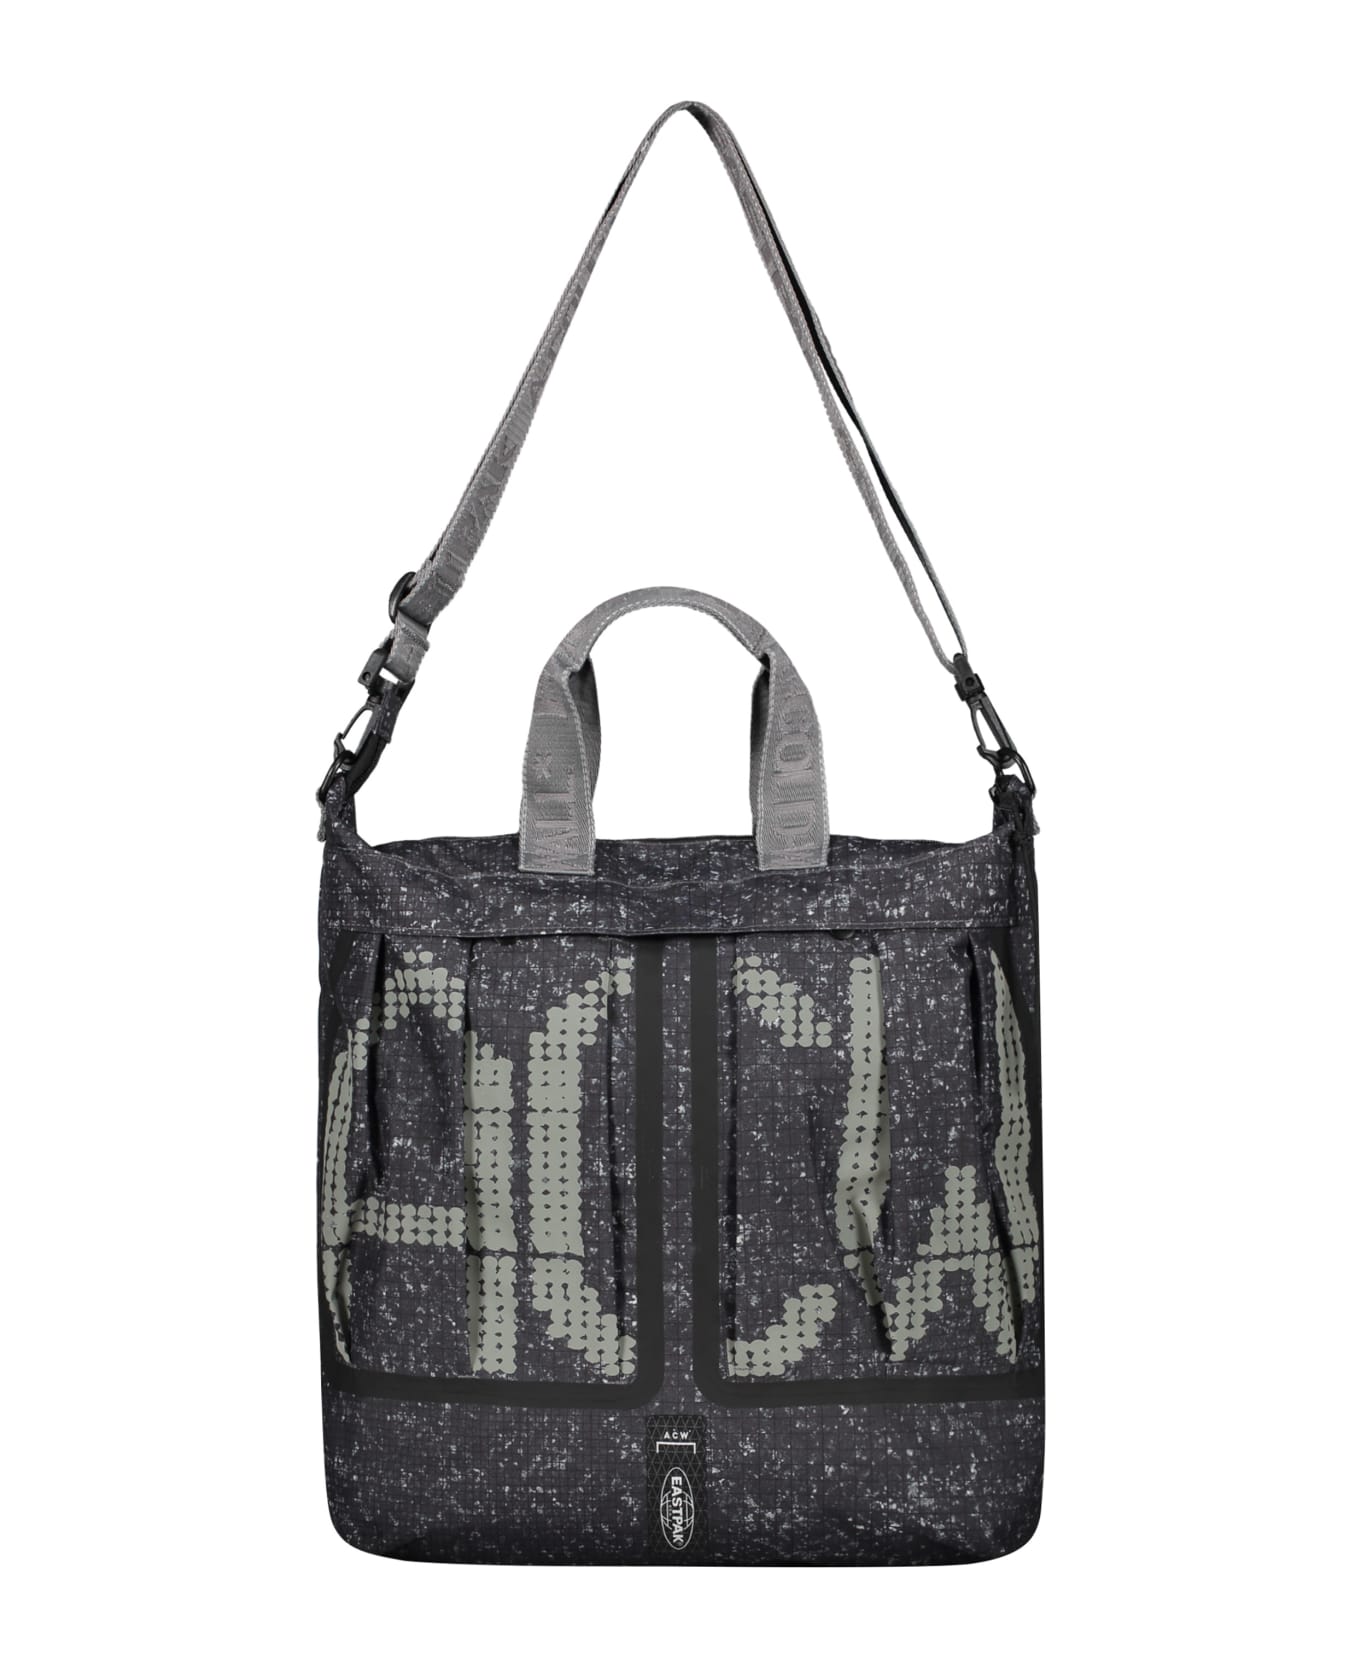 A-COLD-WALL Printed Tote Bag - blue